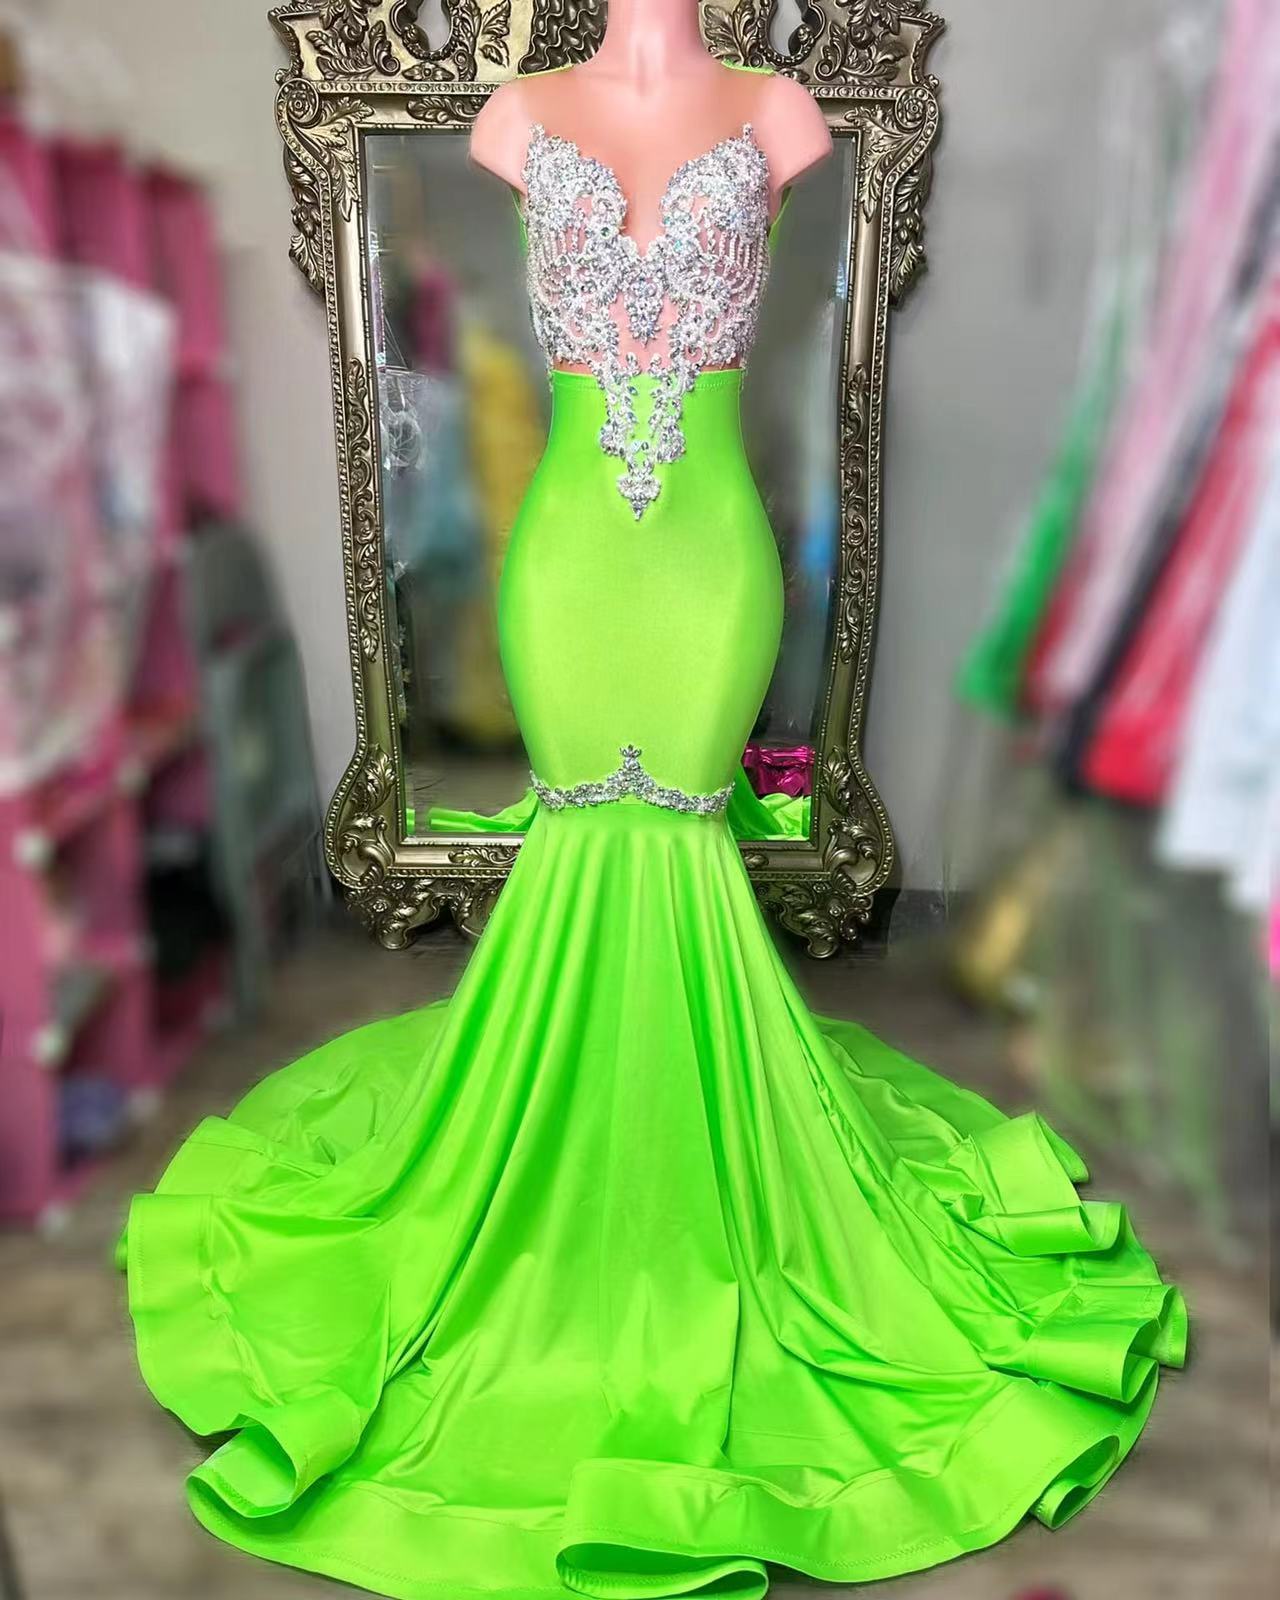 Green Illusion Crew Neckline Prom Dresses Mermaid Beading Sparkly Sequins Formal Evening Gowns Satin Lace Party Dresses For Women